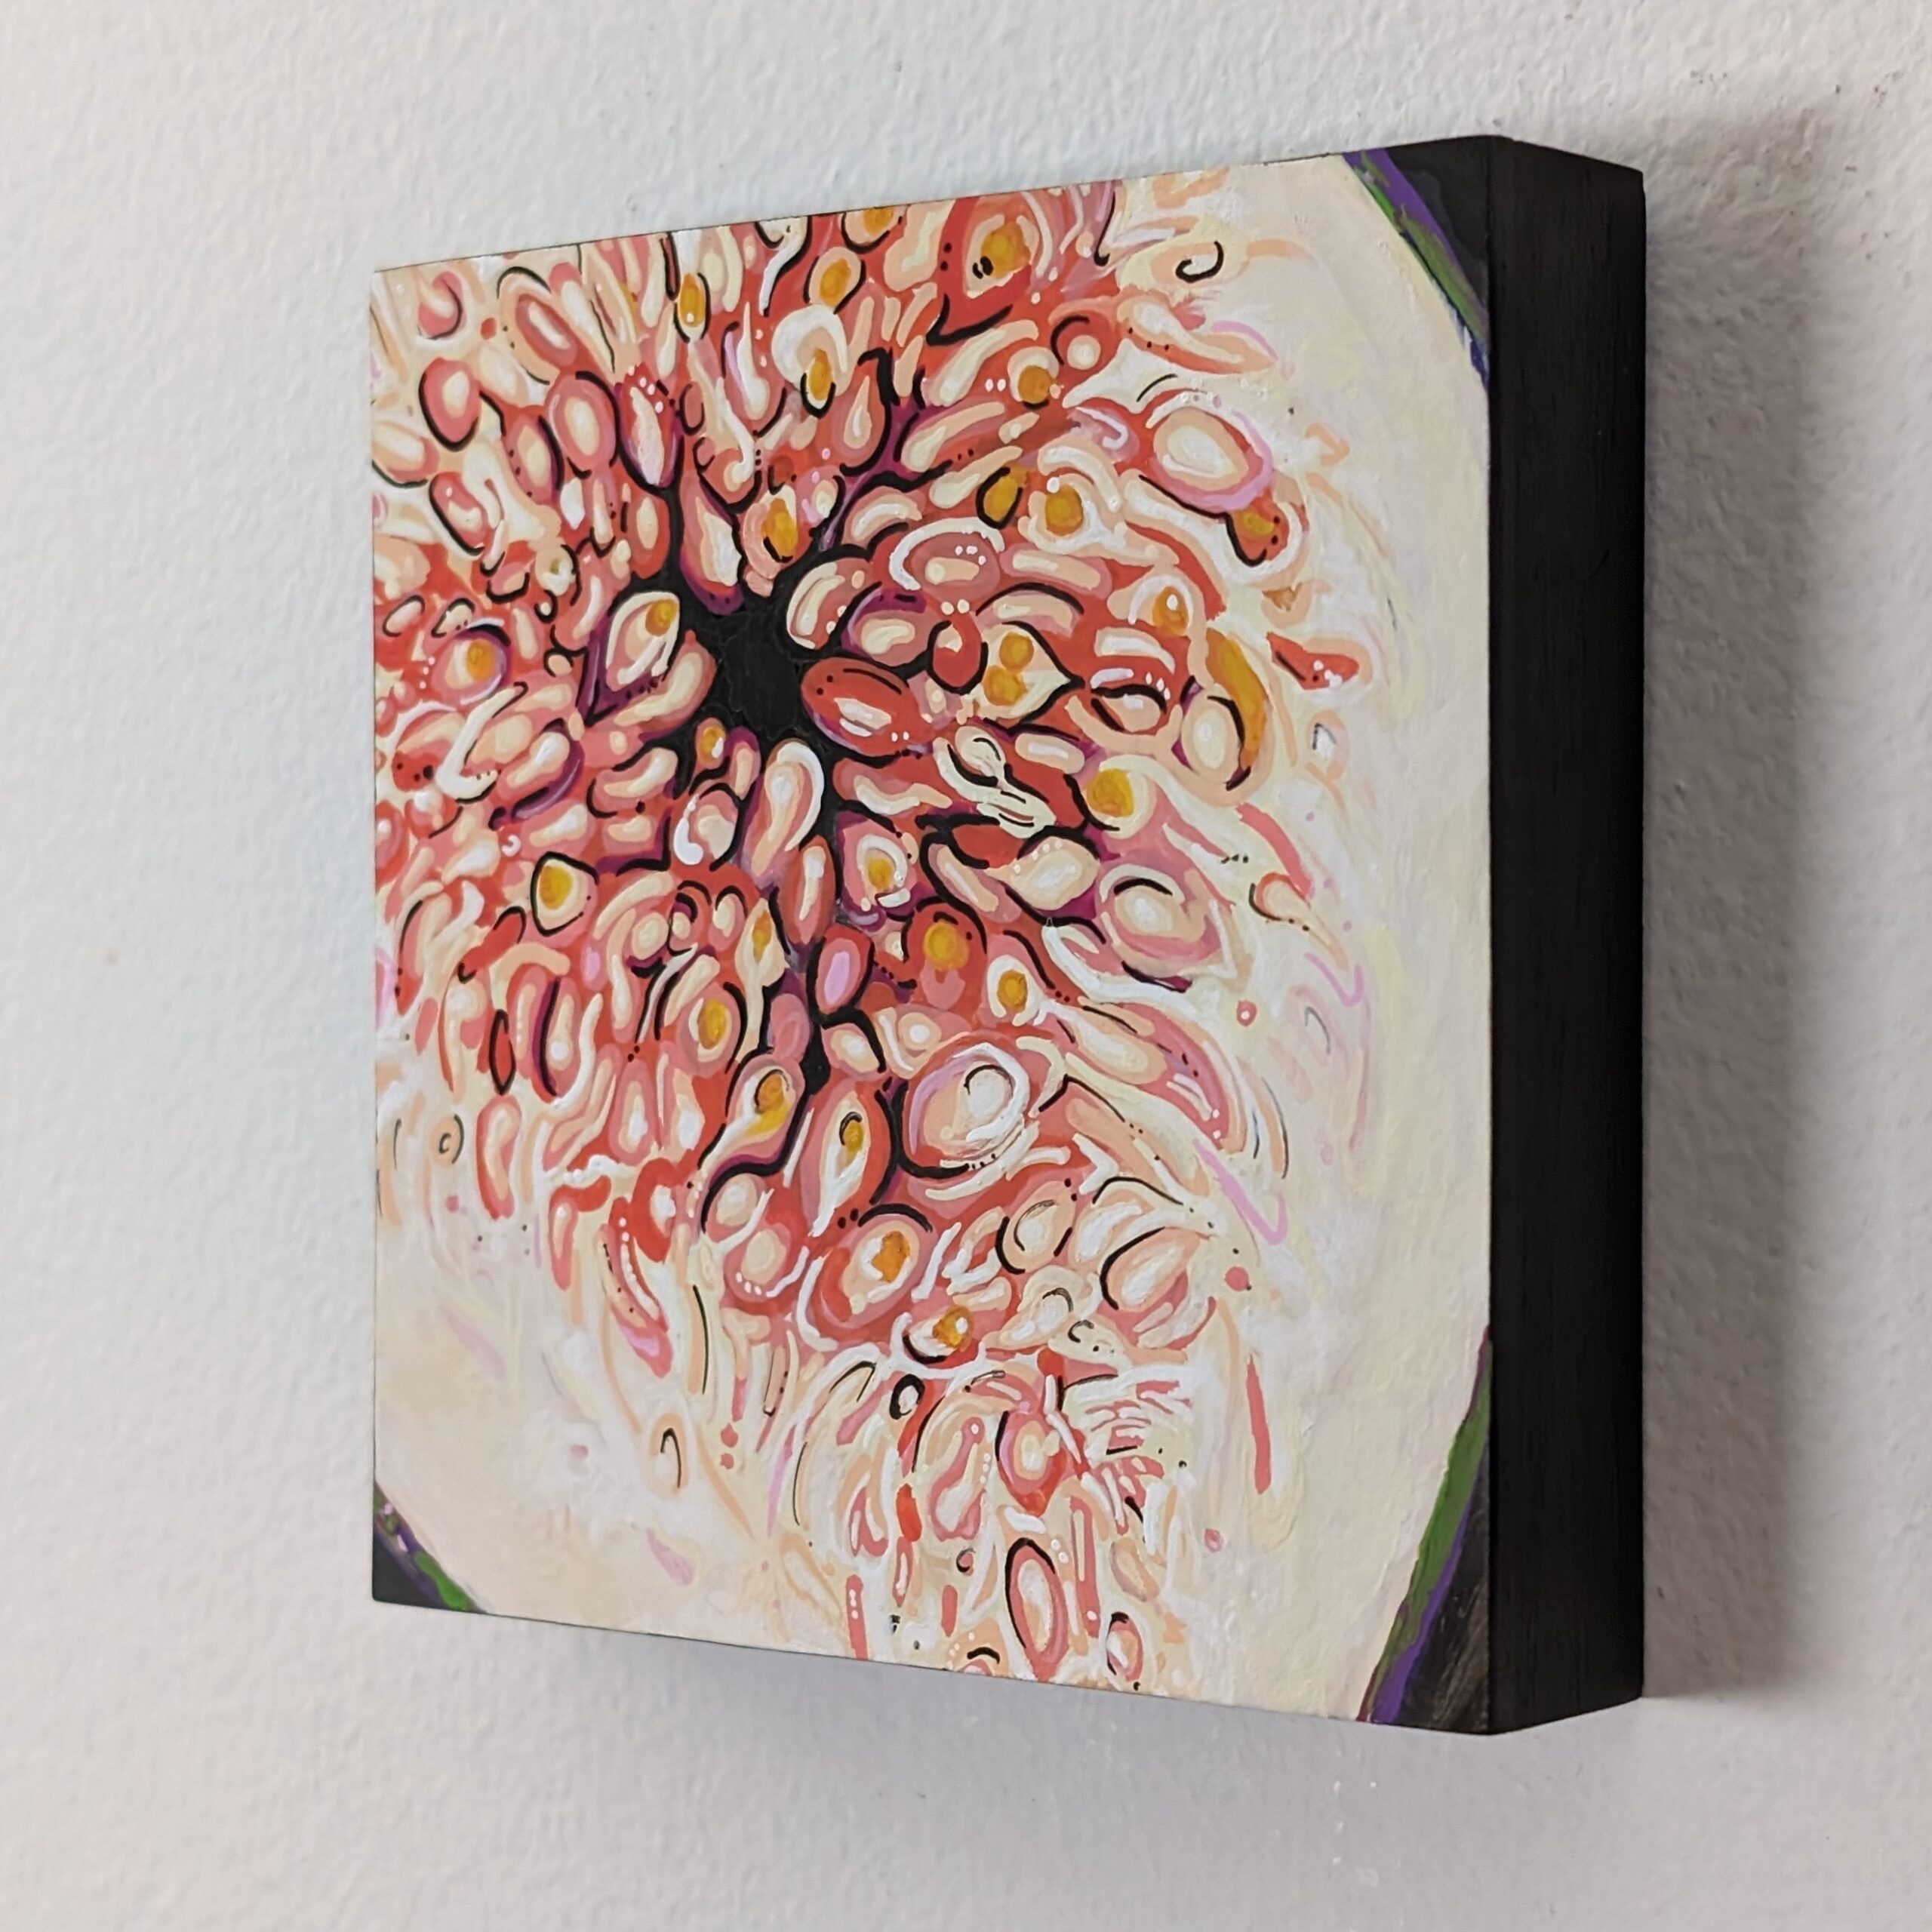 Angela Faustina, FIG X, 2023. Acrylic on cradled painting panel, 4" by 4". Available through Angela's studio shop.